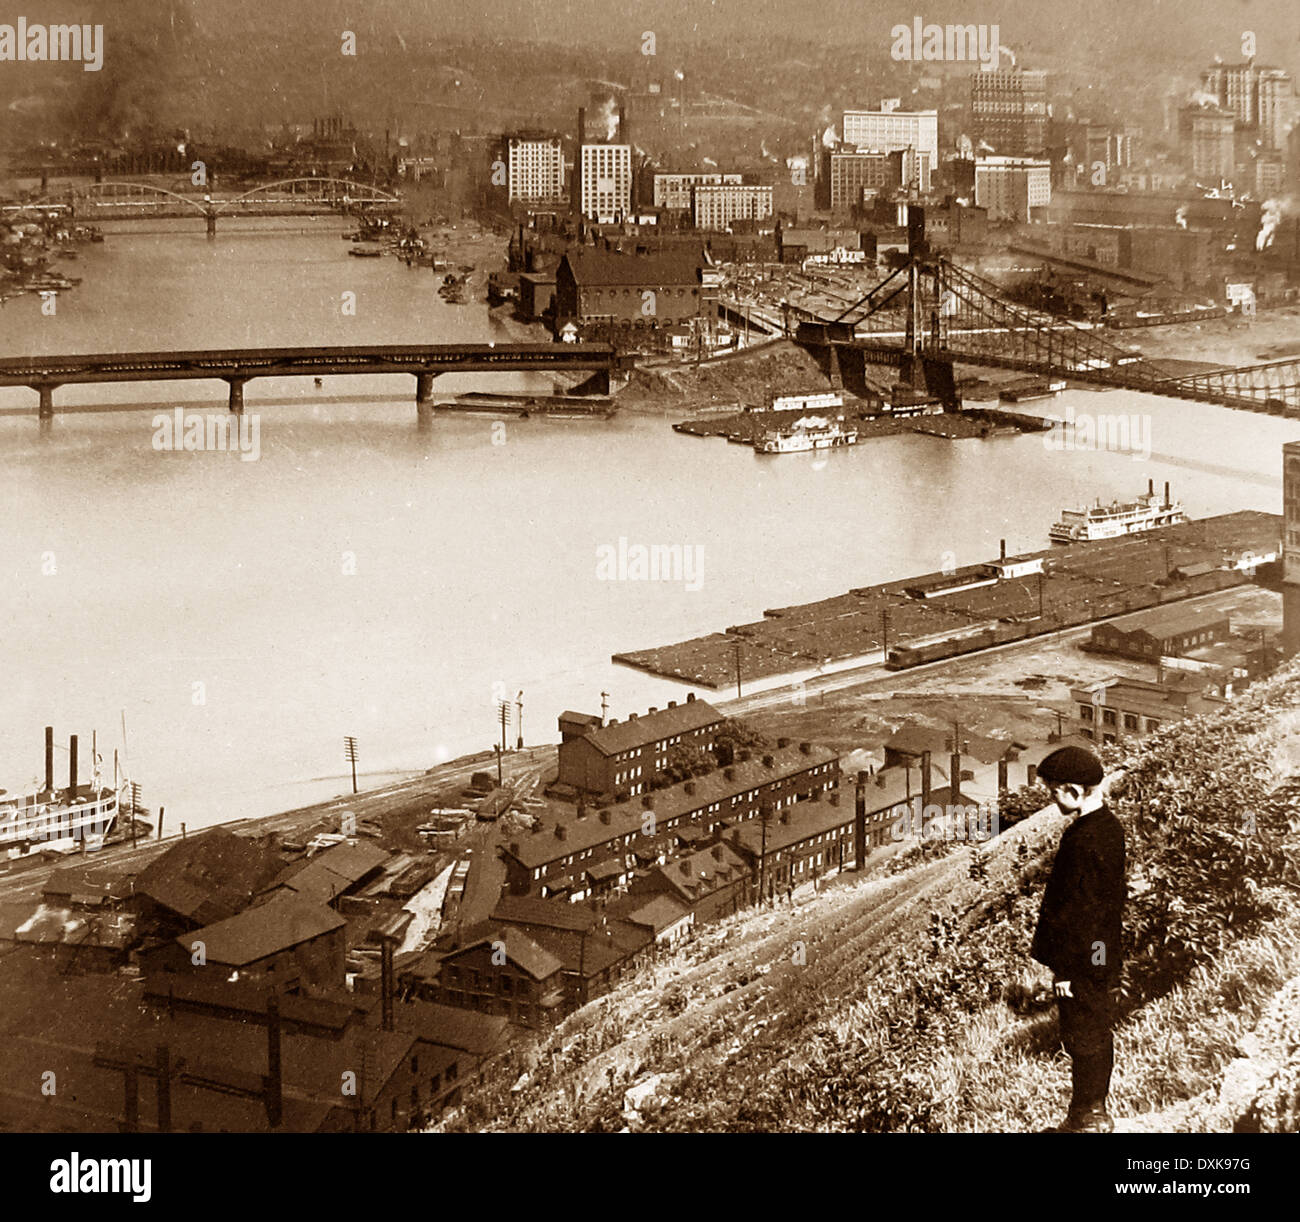 Confluence of the Allegheny and Monongahela Rivers, Pittsburg, USA early 1900s Stock Photo